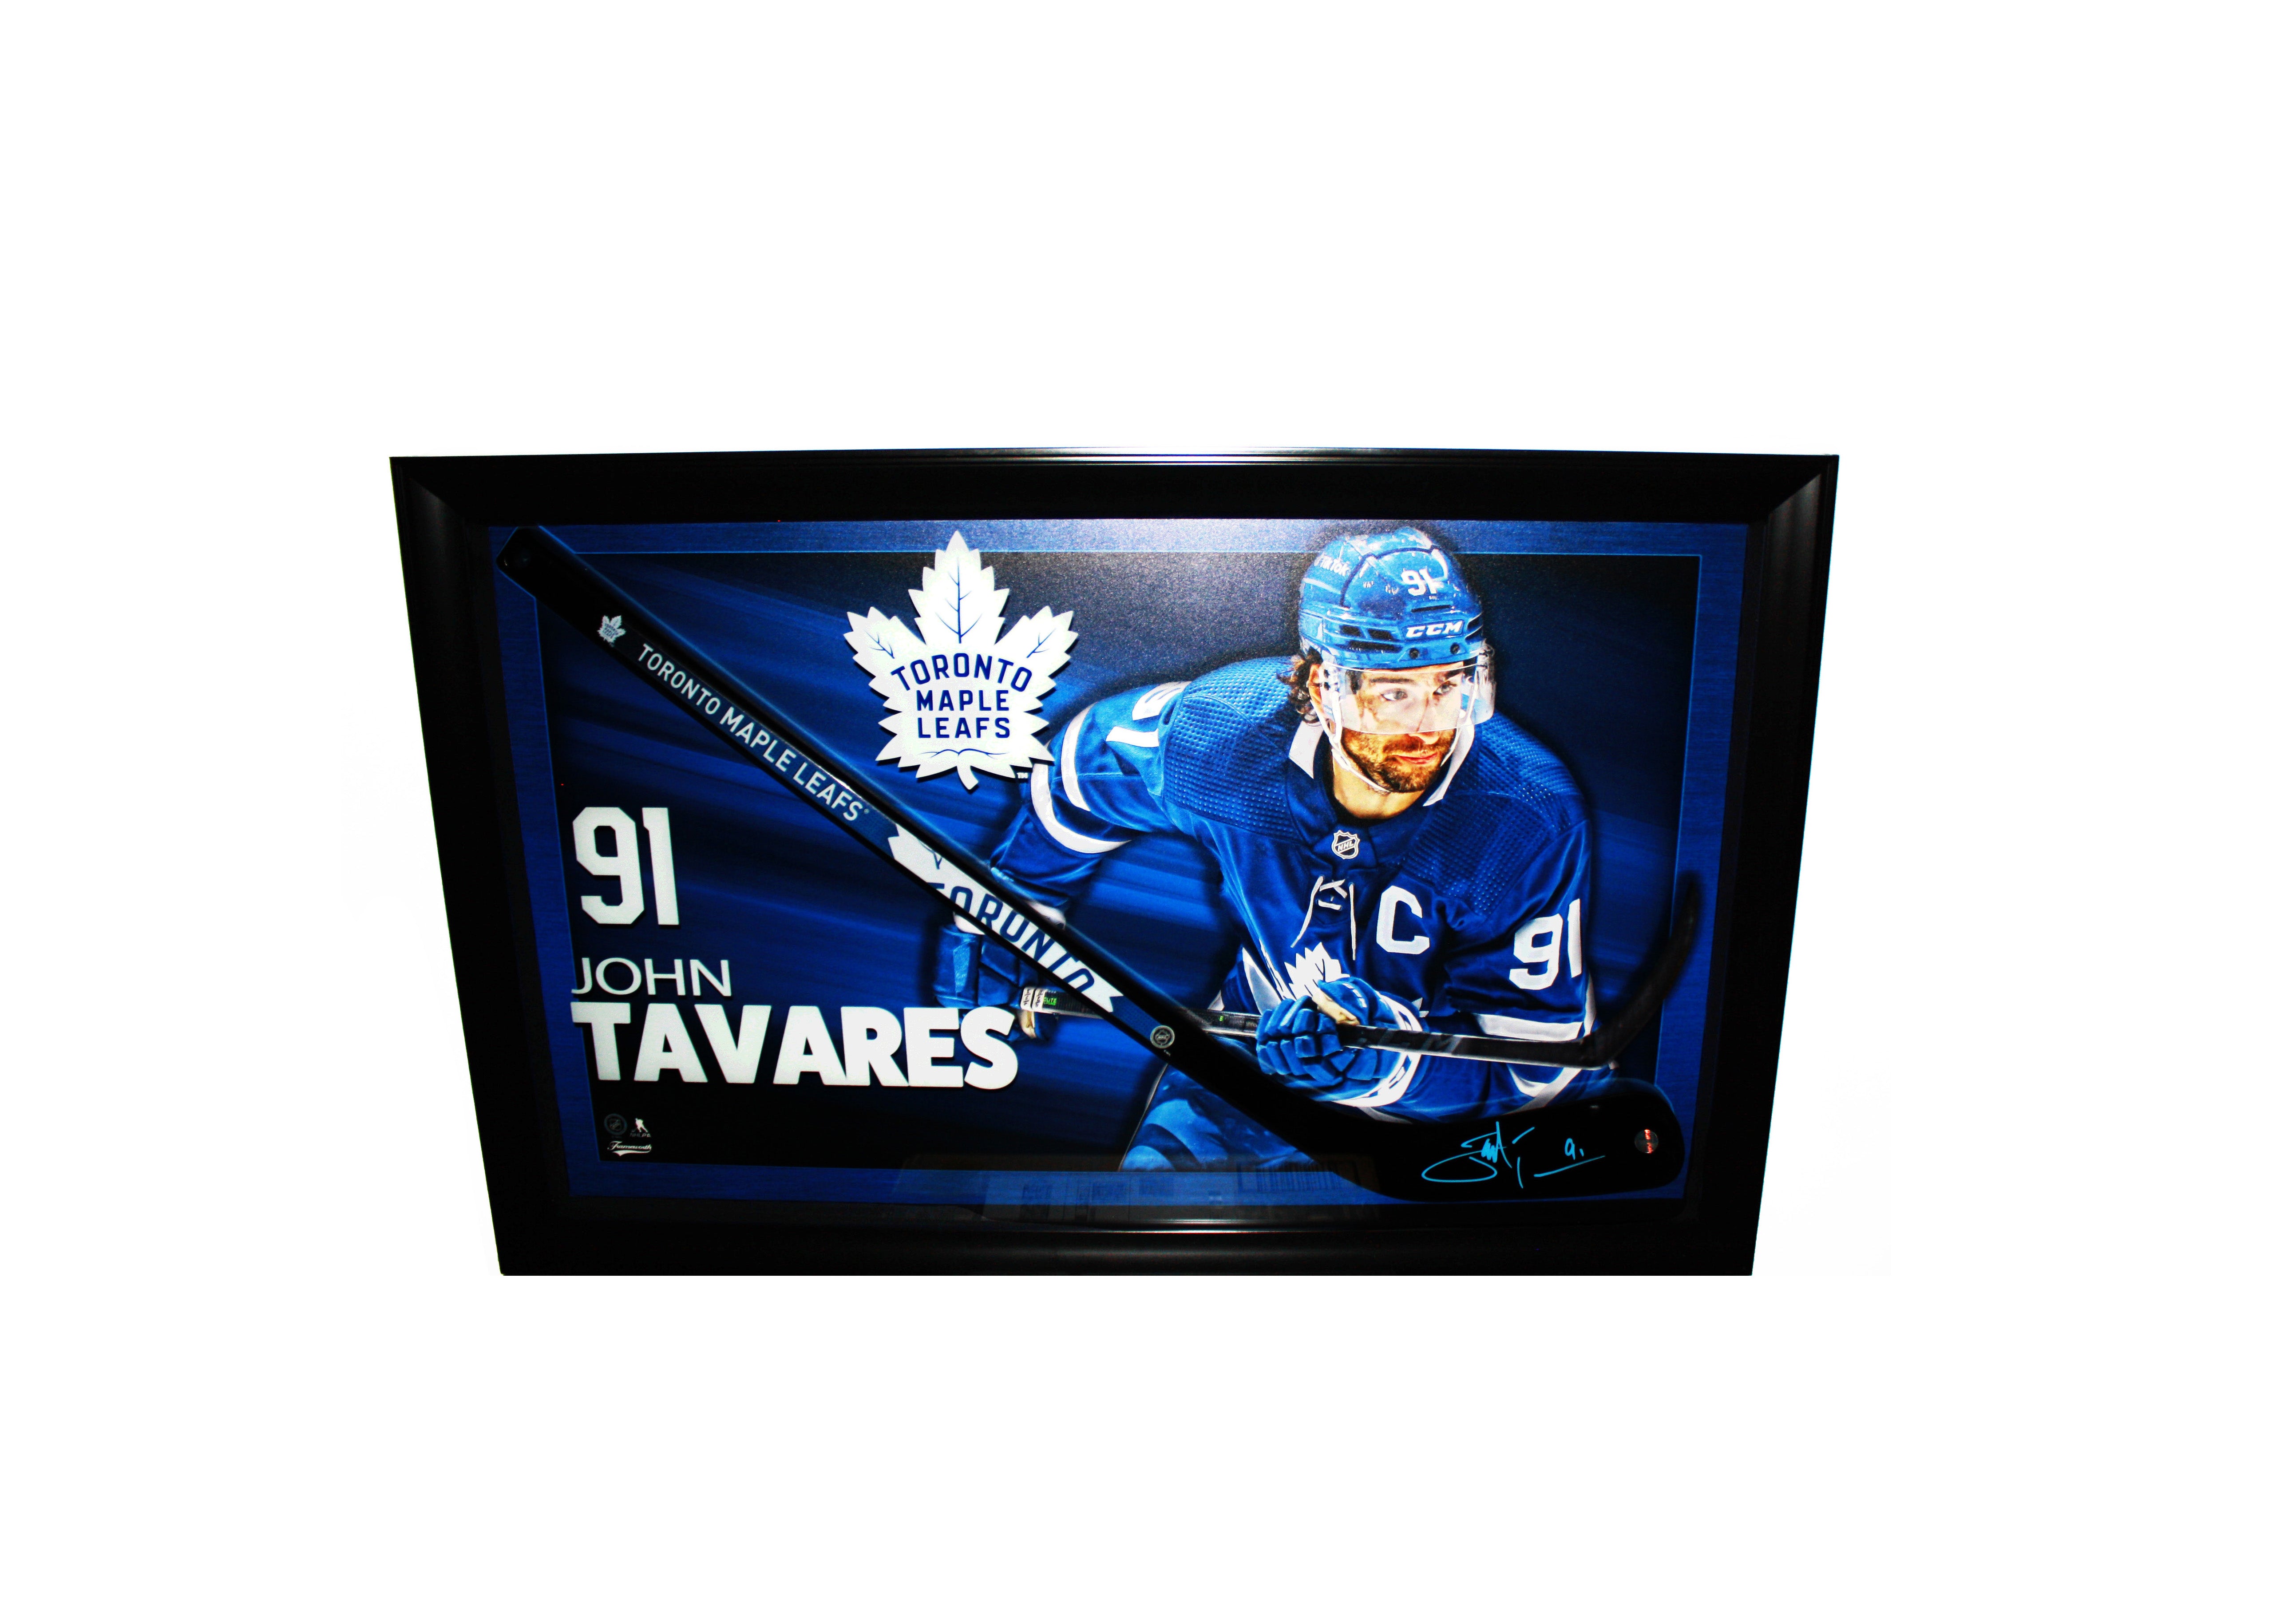 John Tavares Authentic Autographed Jersey & Framed Mini-Stick Package Deal